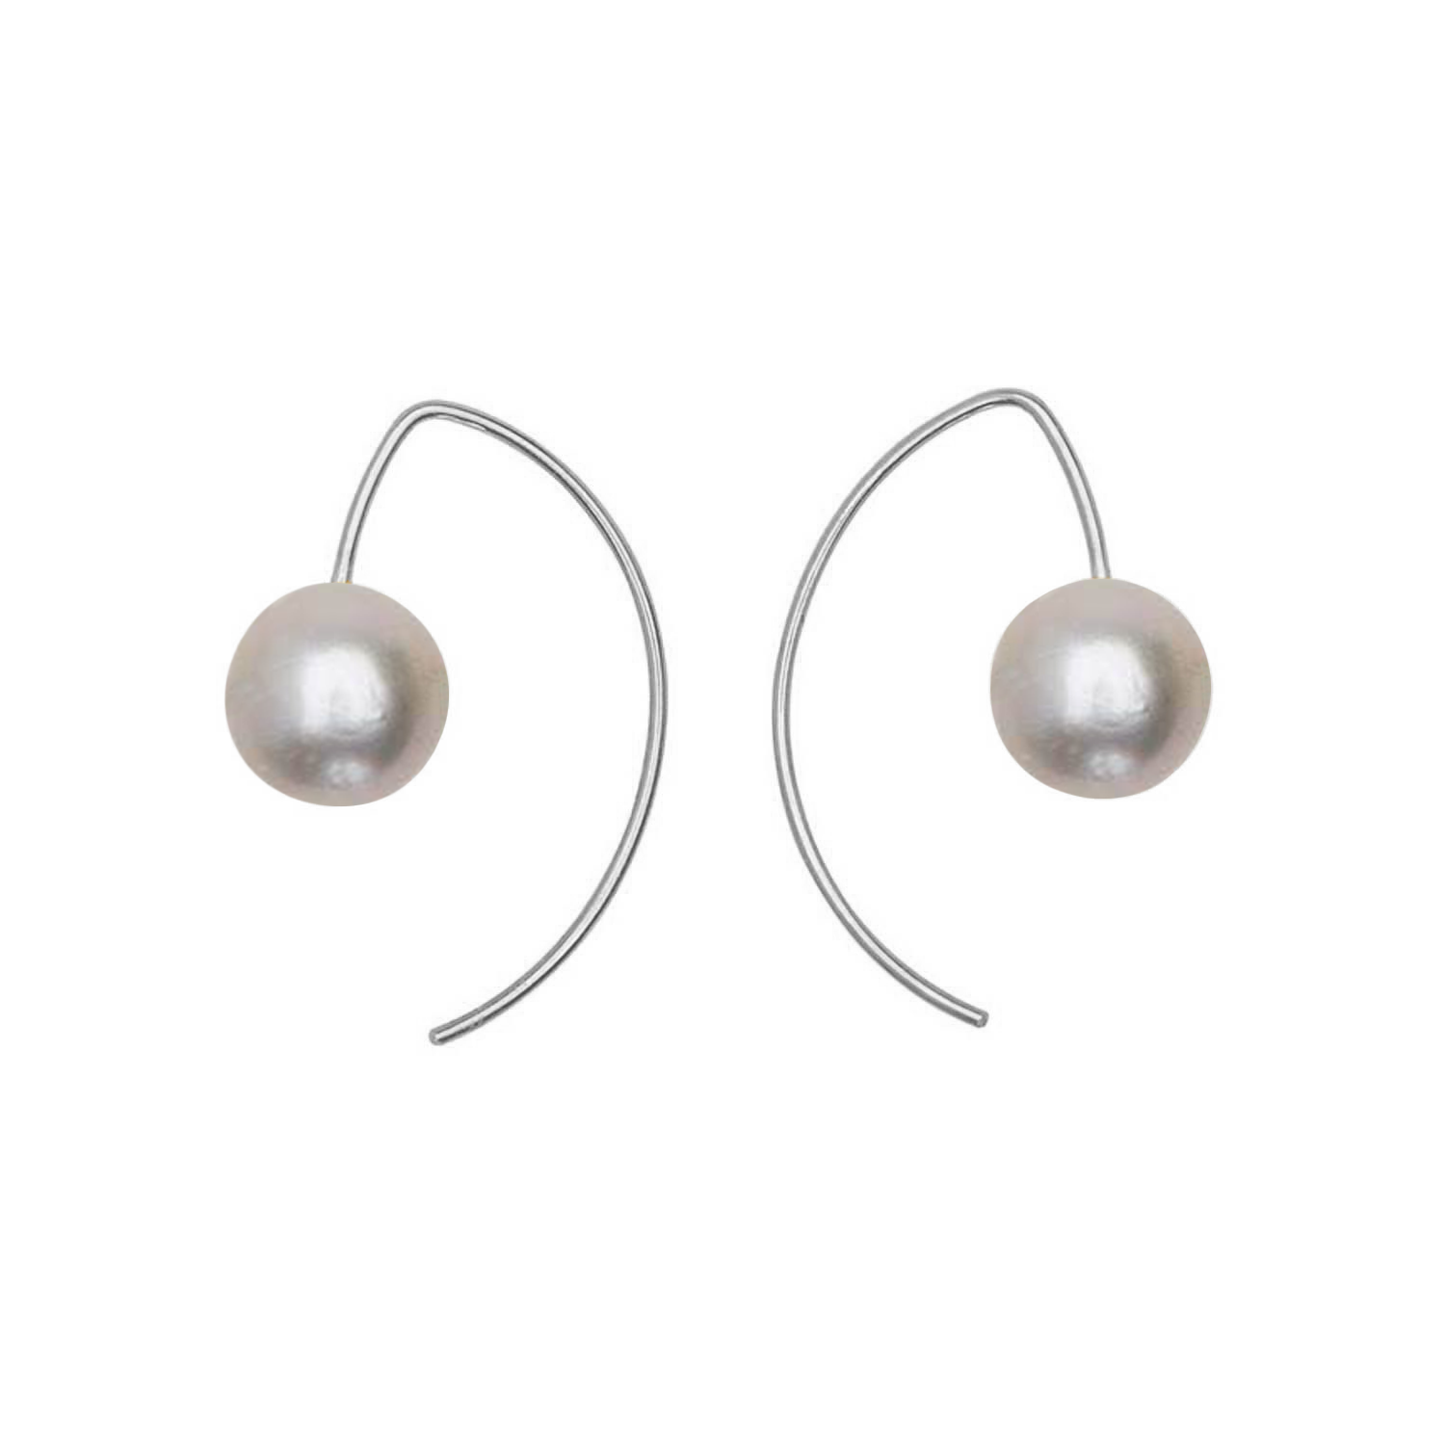 Lobe Huggers, Short Curve Earrings with White Pearls